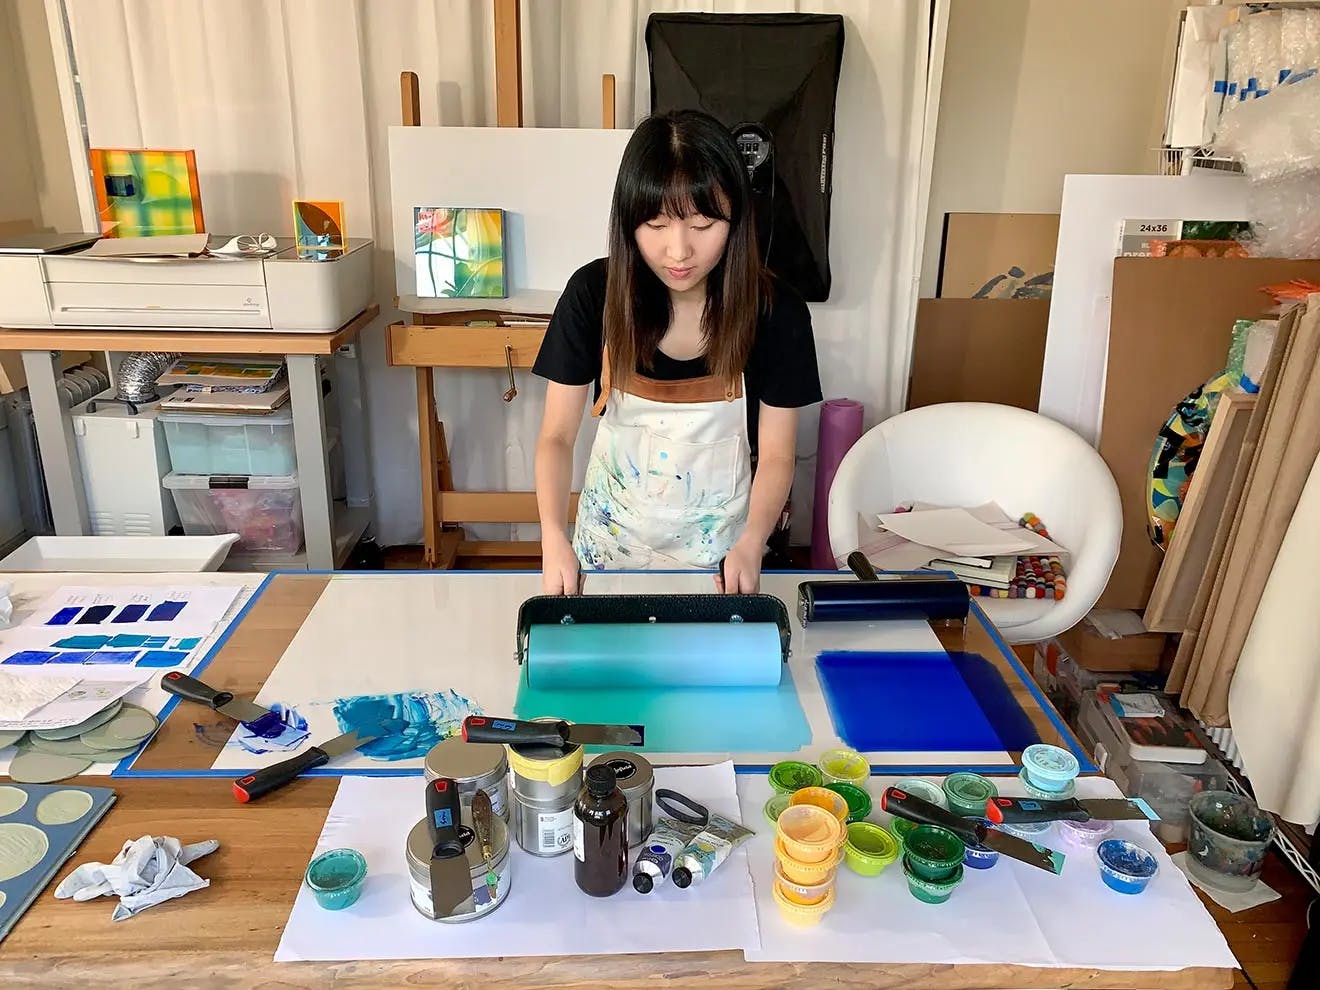 Journal: Visit with Erin Zhao: Gallery